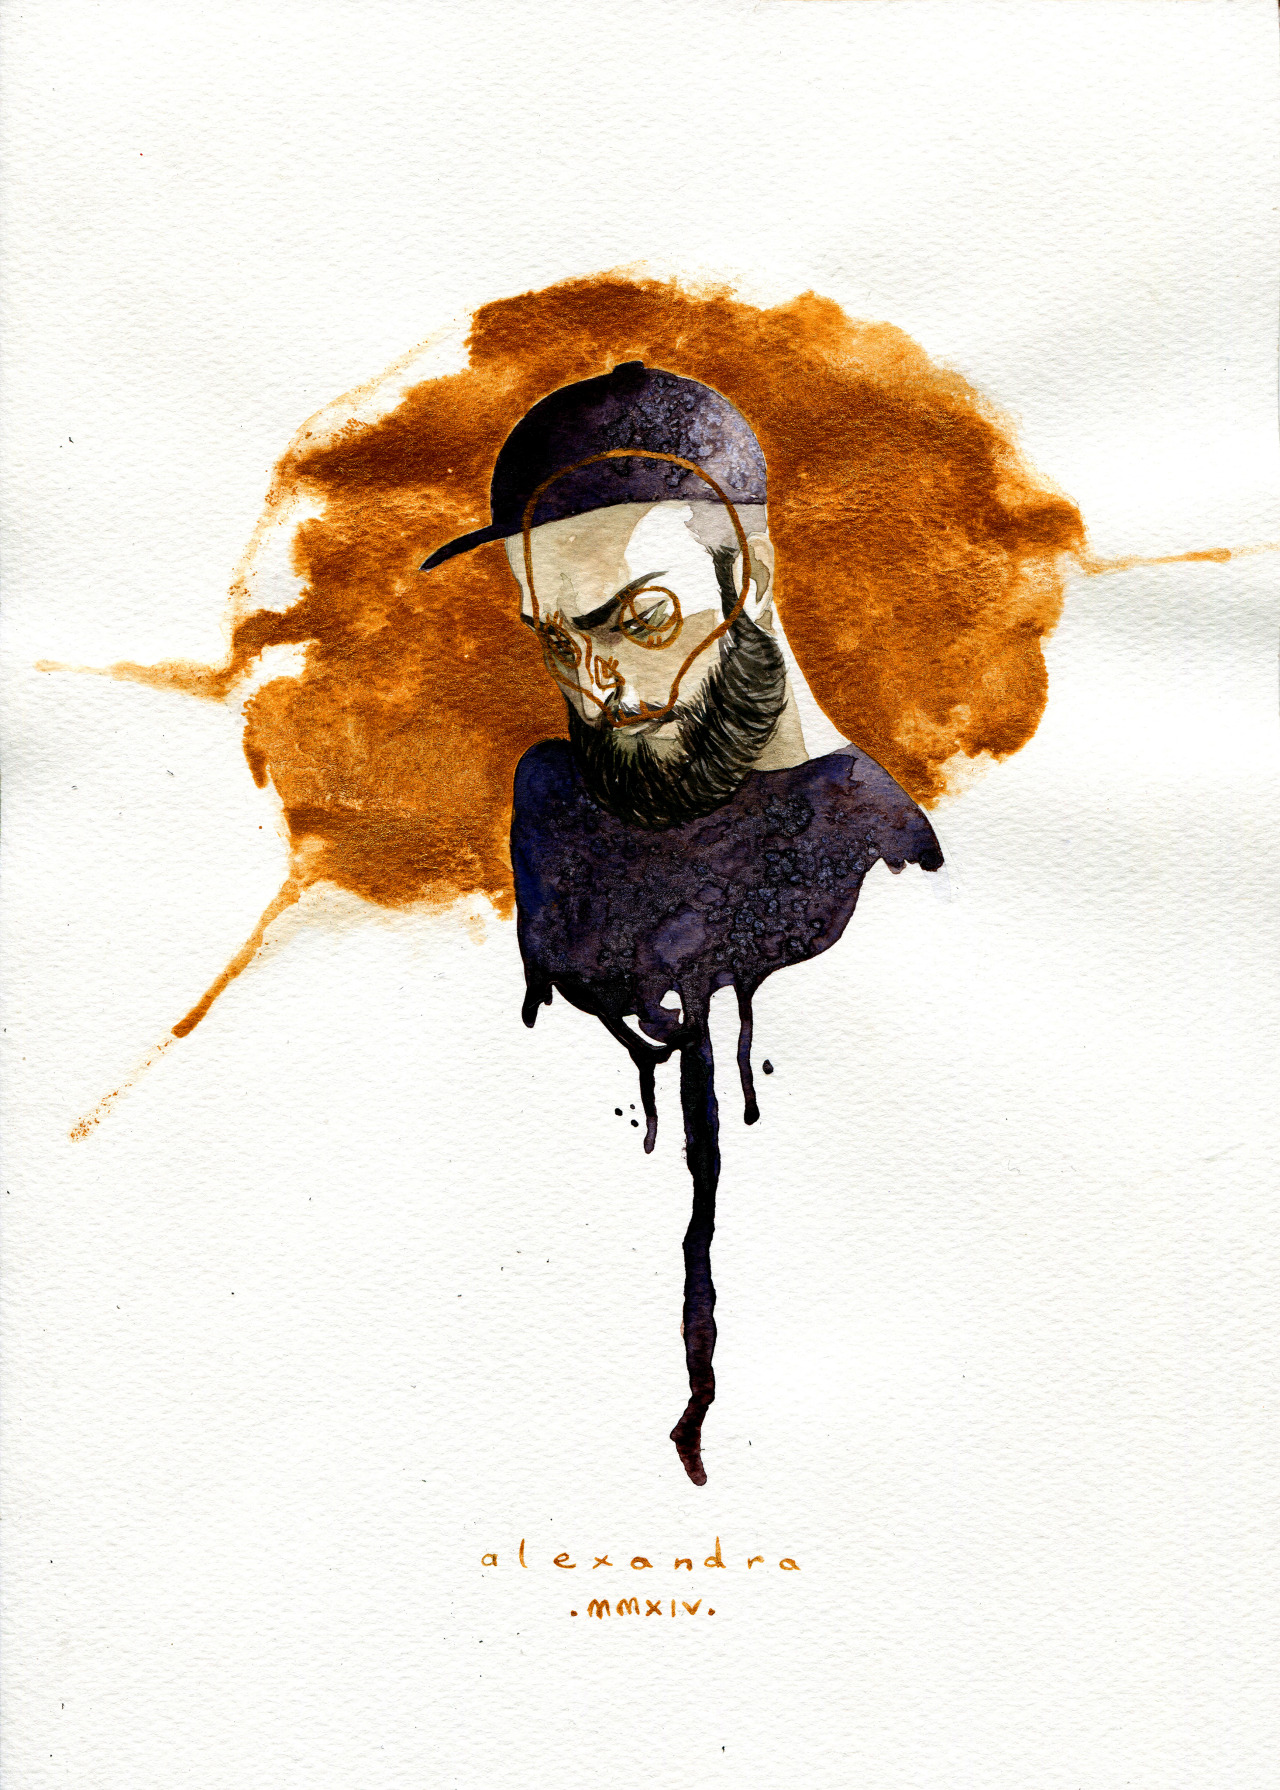 I’ve been planning to do a Woodkid artwork for a long time, today was the lucky day! A4 - watercolor and ink